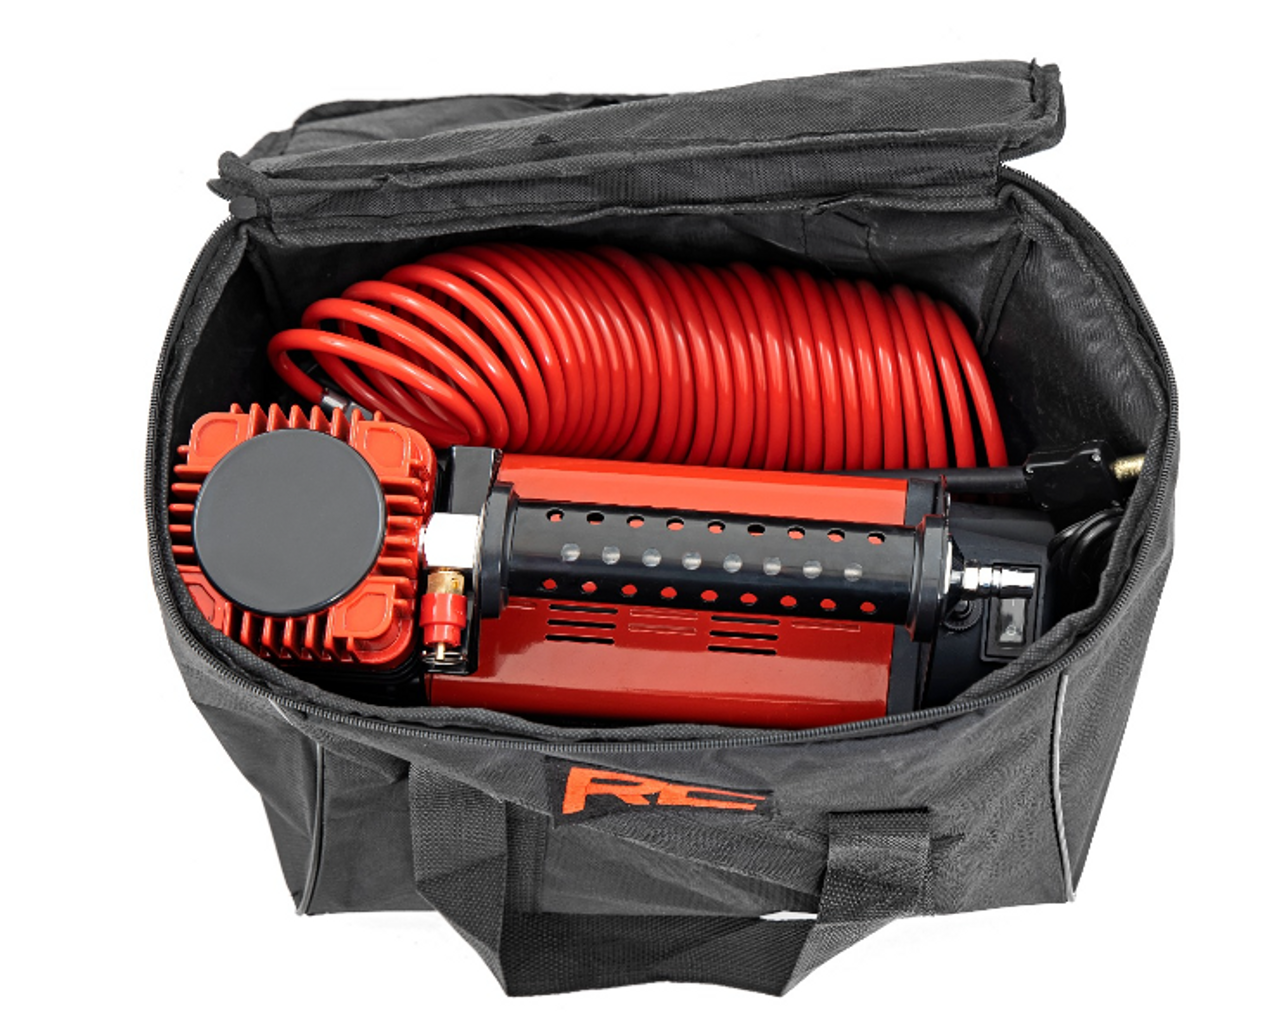 Rough Country RS200 Air Compressor Kit